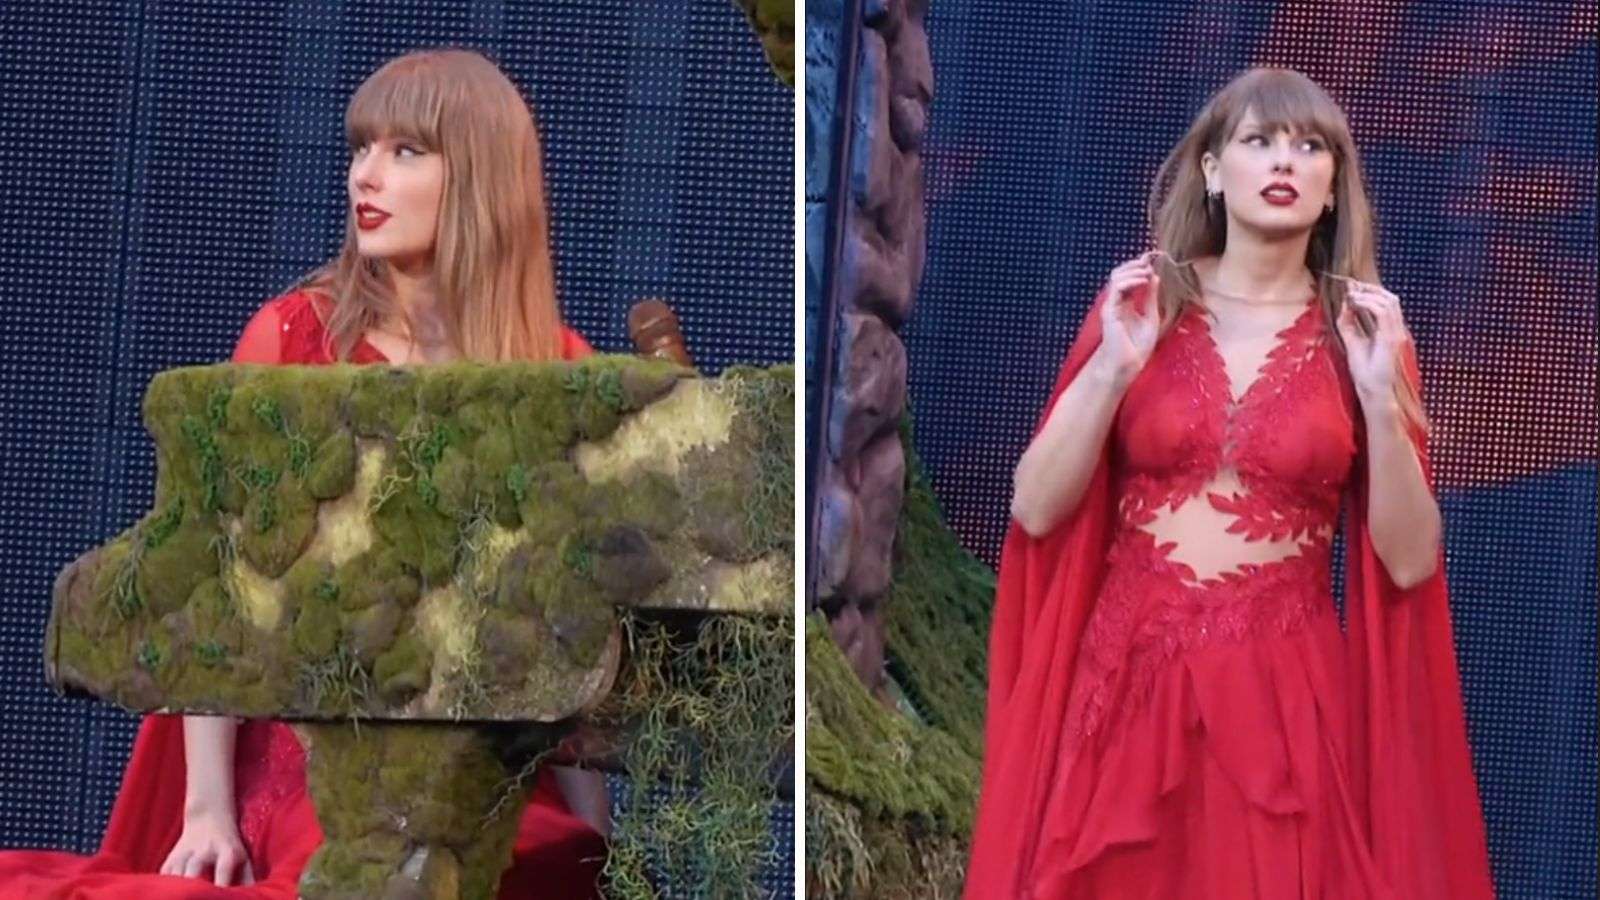 Taylor Swift gets emotional at final Liverpool show after Joe Alwyn interview - Dexerto